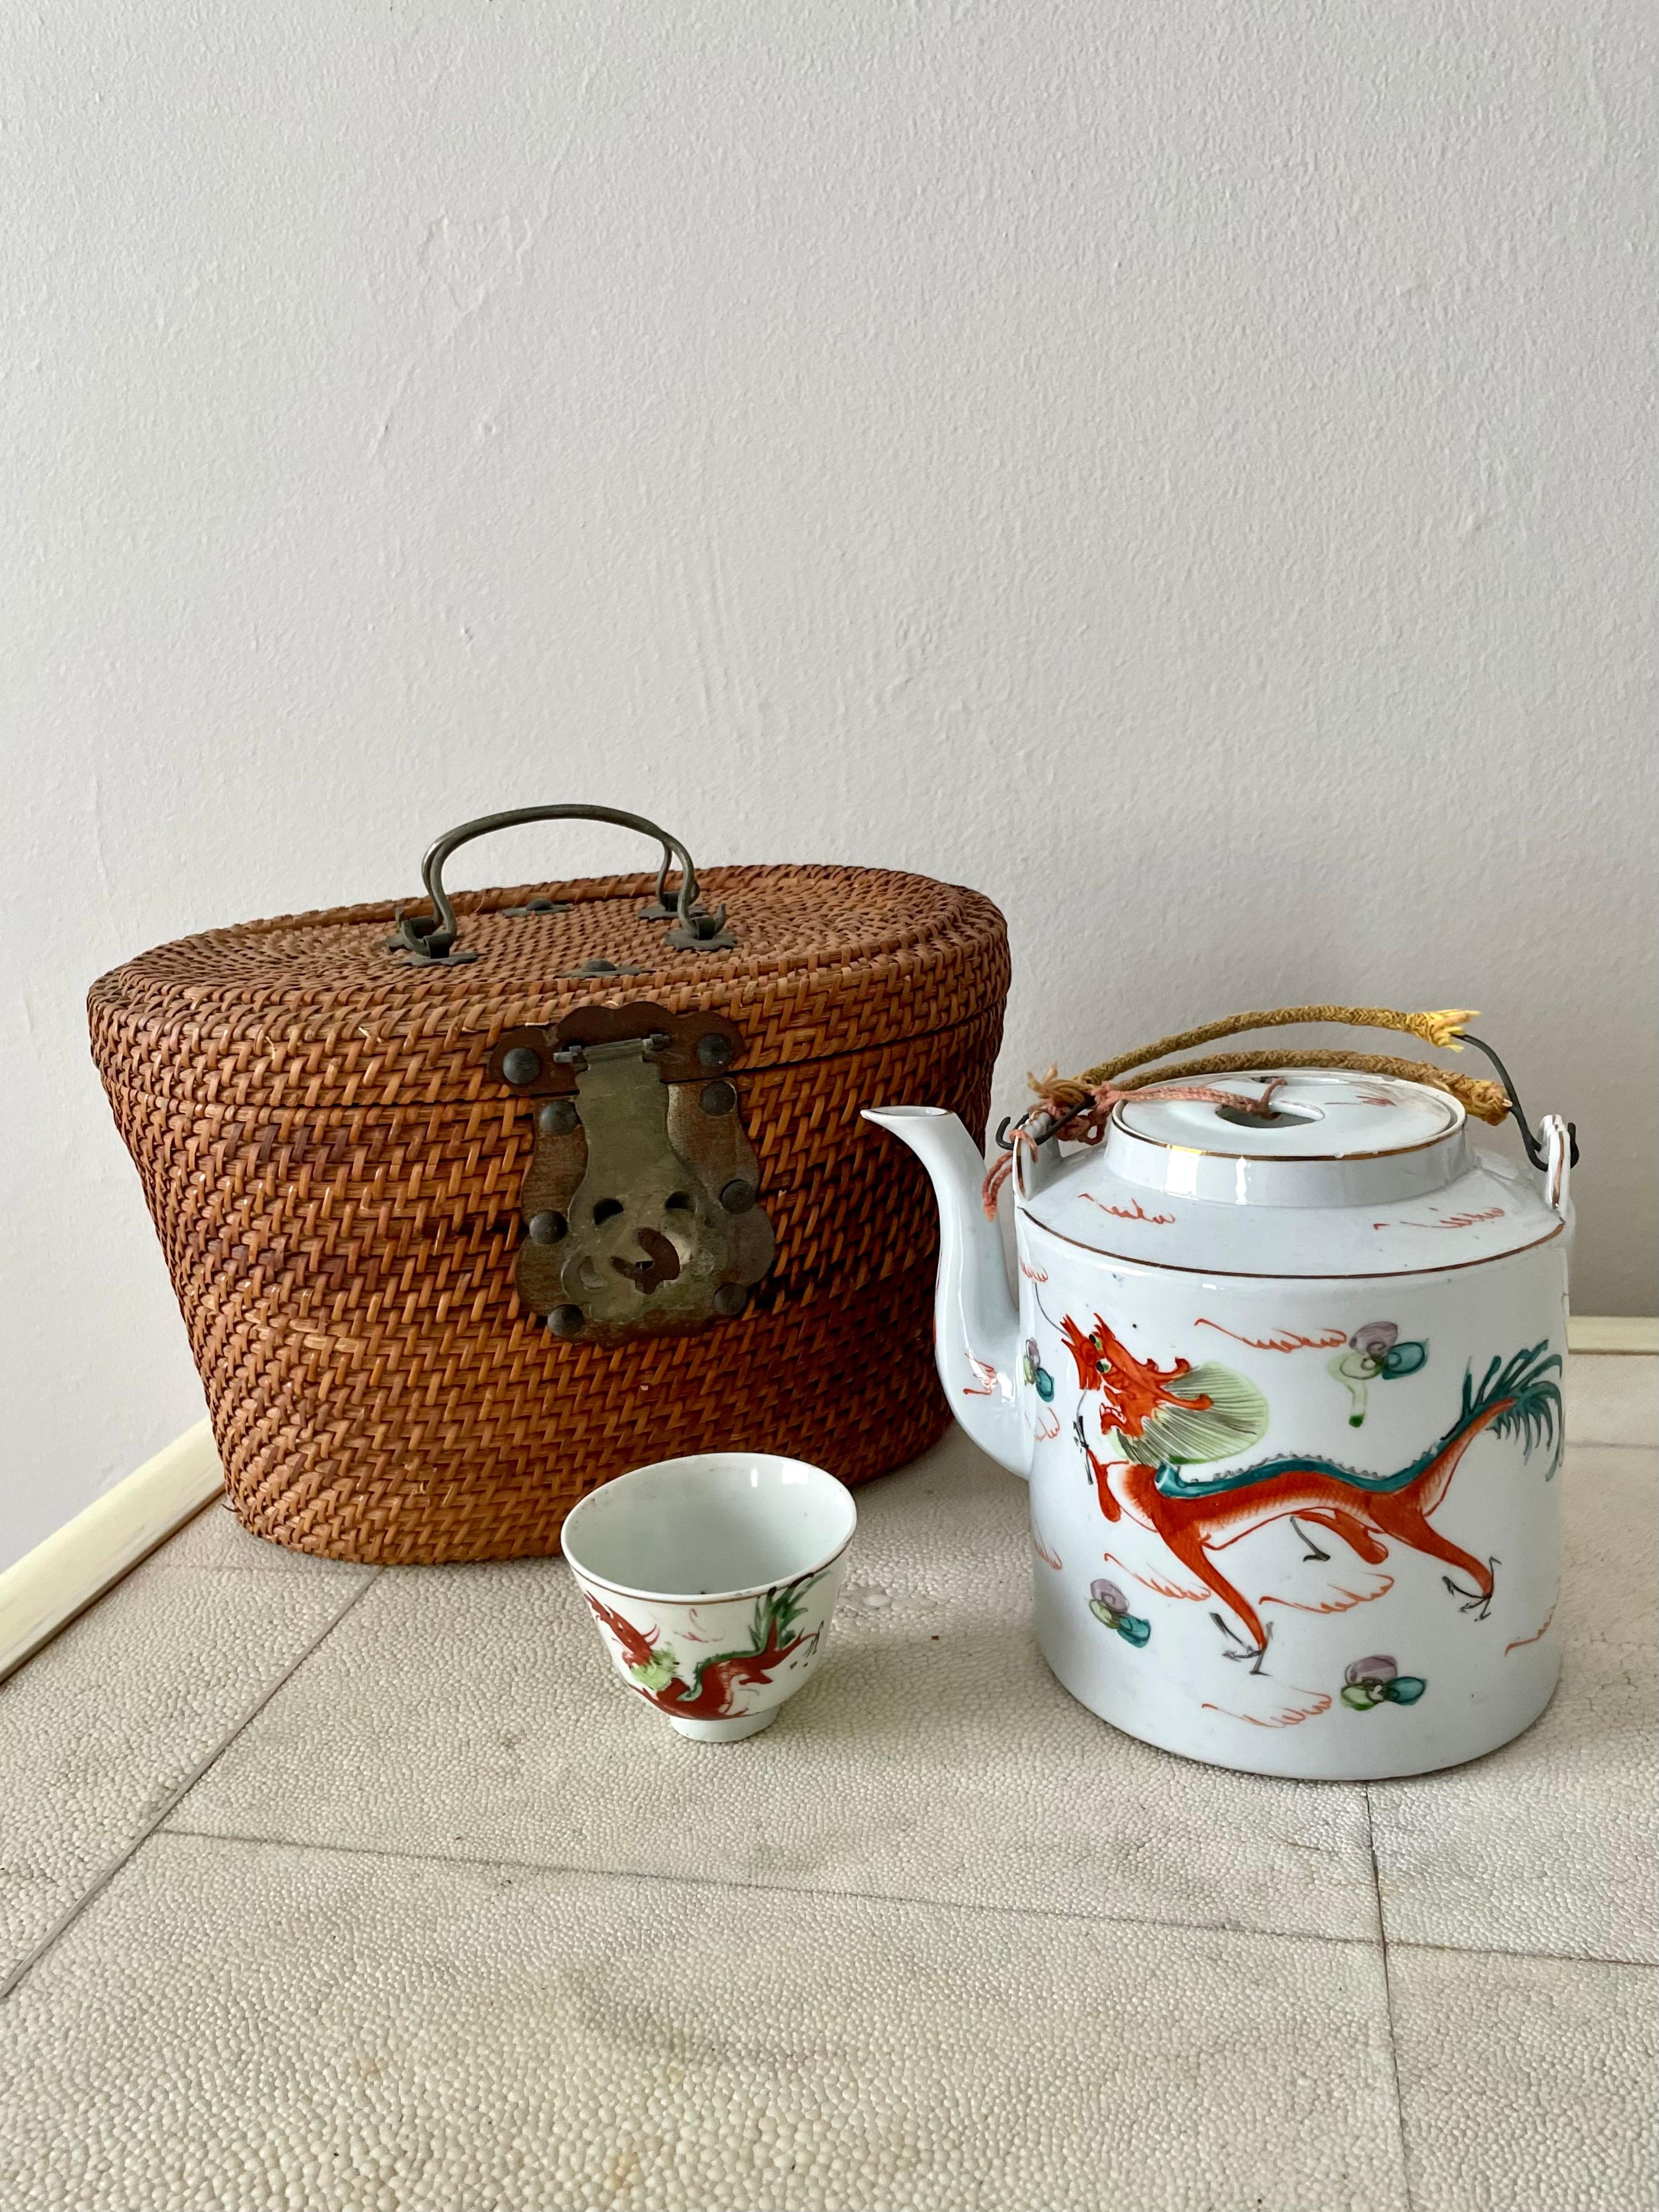 20th Century Asian Tea Set with Hand Woven Wicker Carrying Warmer Basket, Teapot and Mugs For Sale